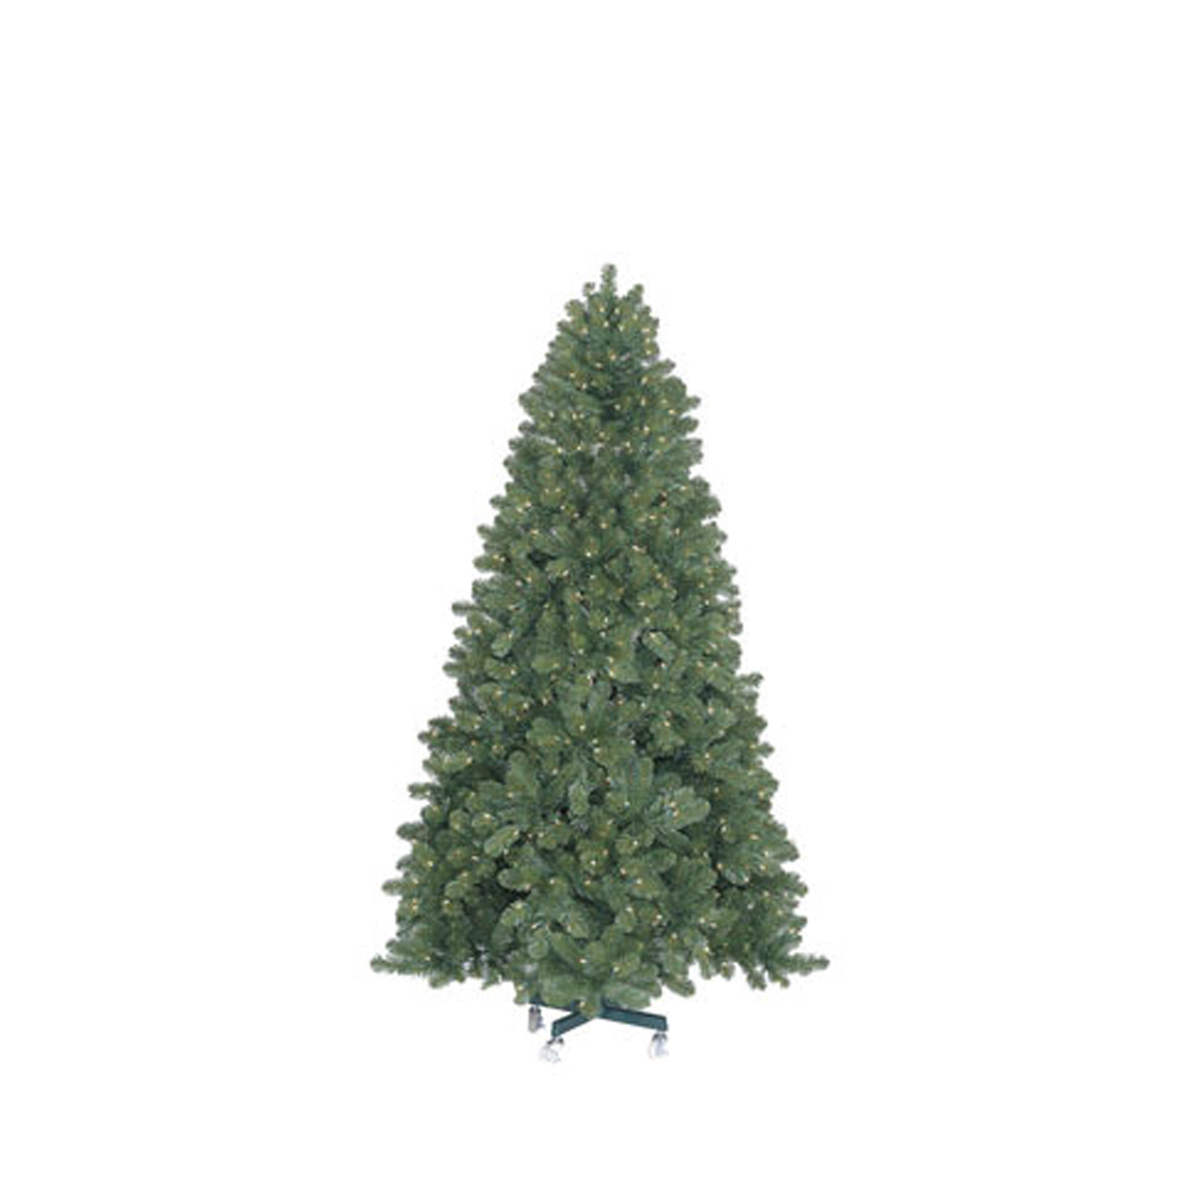 Olympia Fir Christmas Tree - Warm White LED Lights - 7.5ft Tall - Rolling Stand